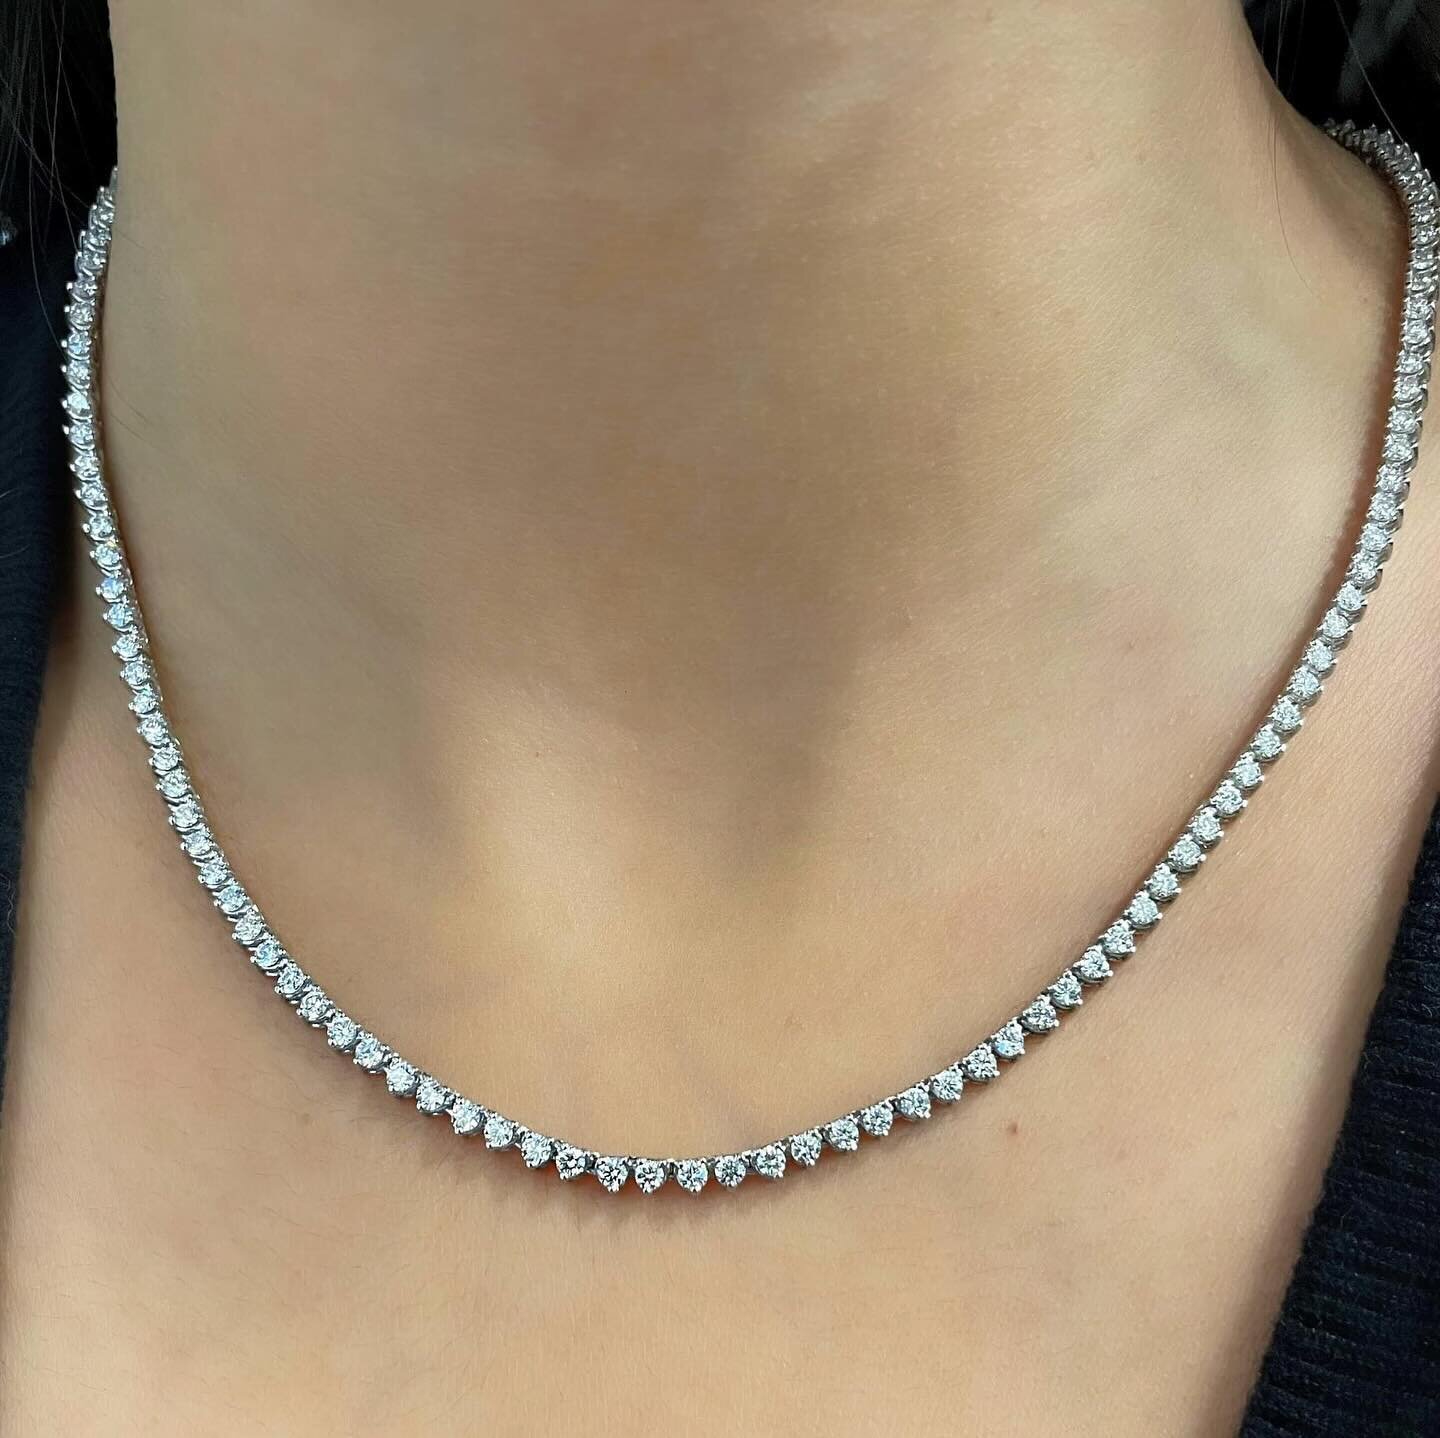 The classic tennis necklace! This one features 5.50 cts of round diamonds set in the elegant 3-prong setting! #natural #diamonds #tennisnecklace #finejewelry